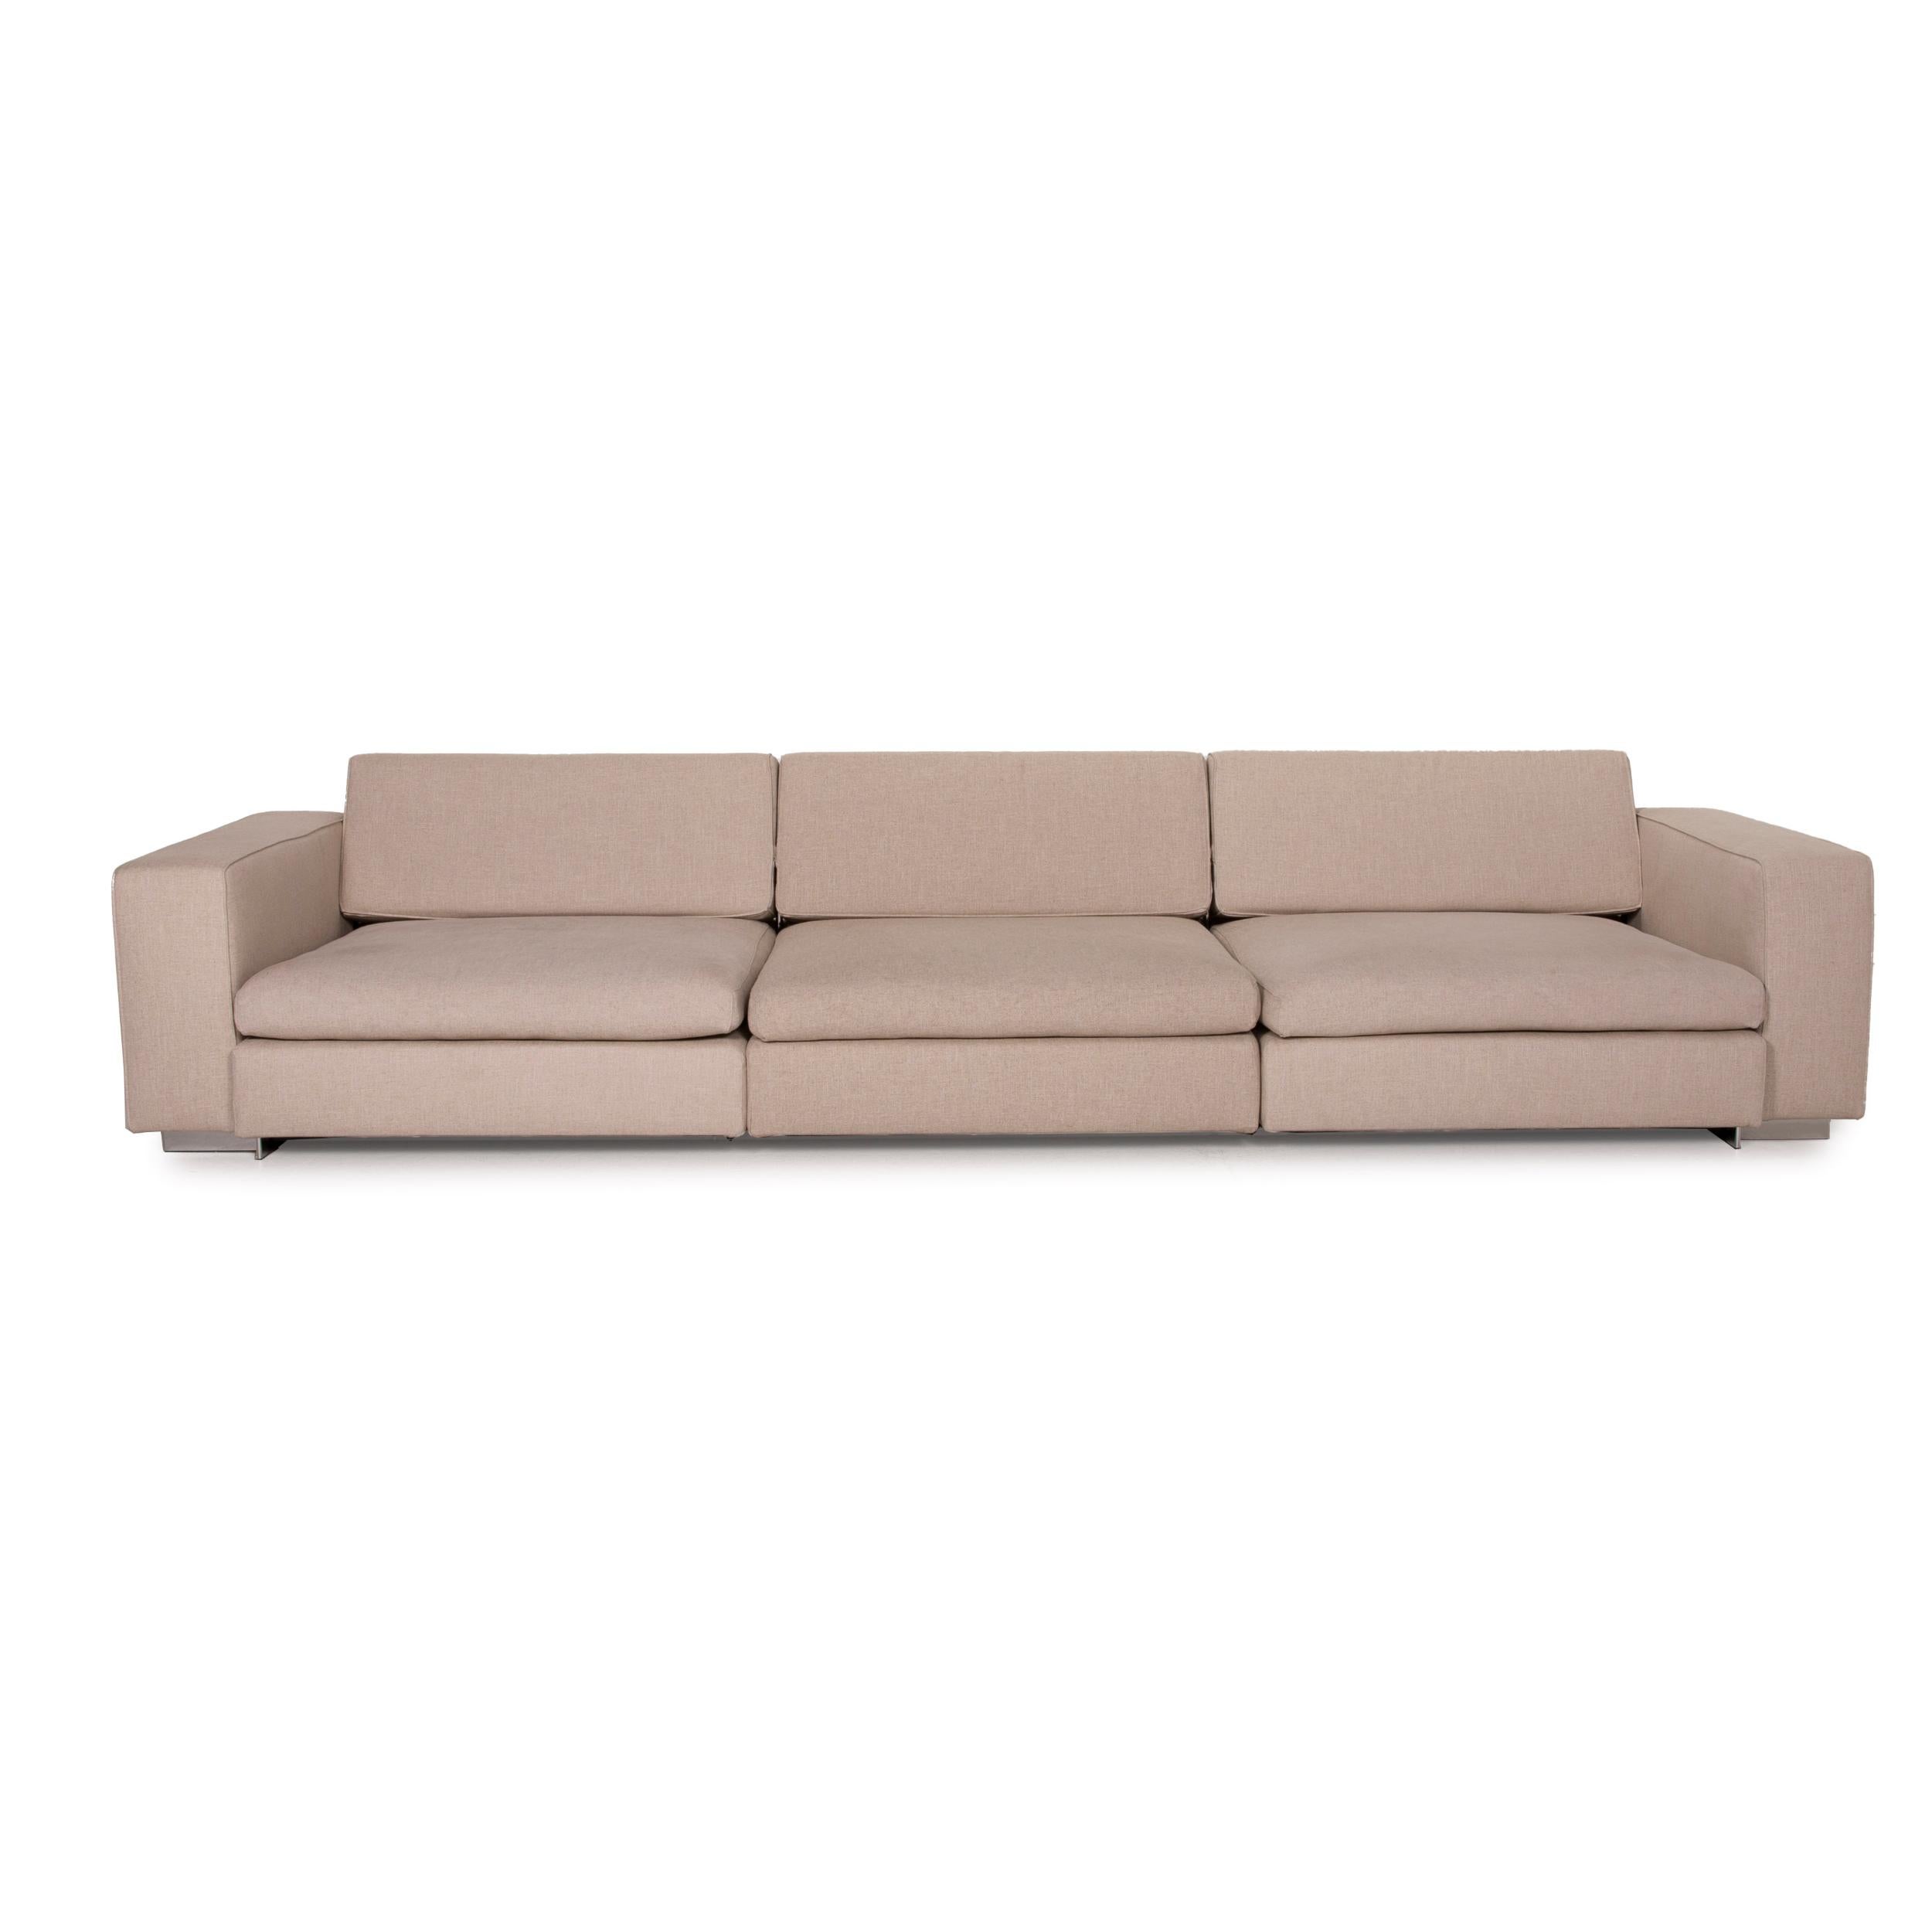 Molteni Turner Fabric Sofa Beige Three-Seater Function In Good Condition For Sale In Cologne, DE